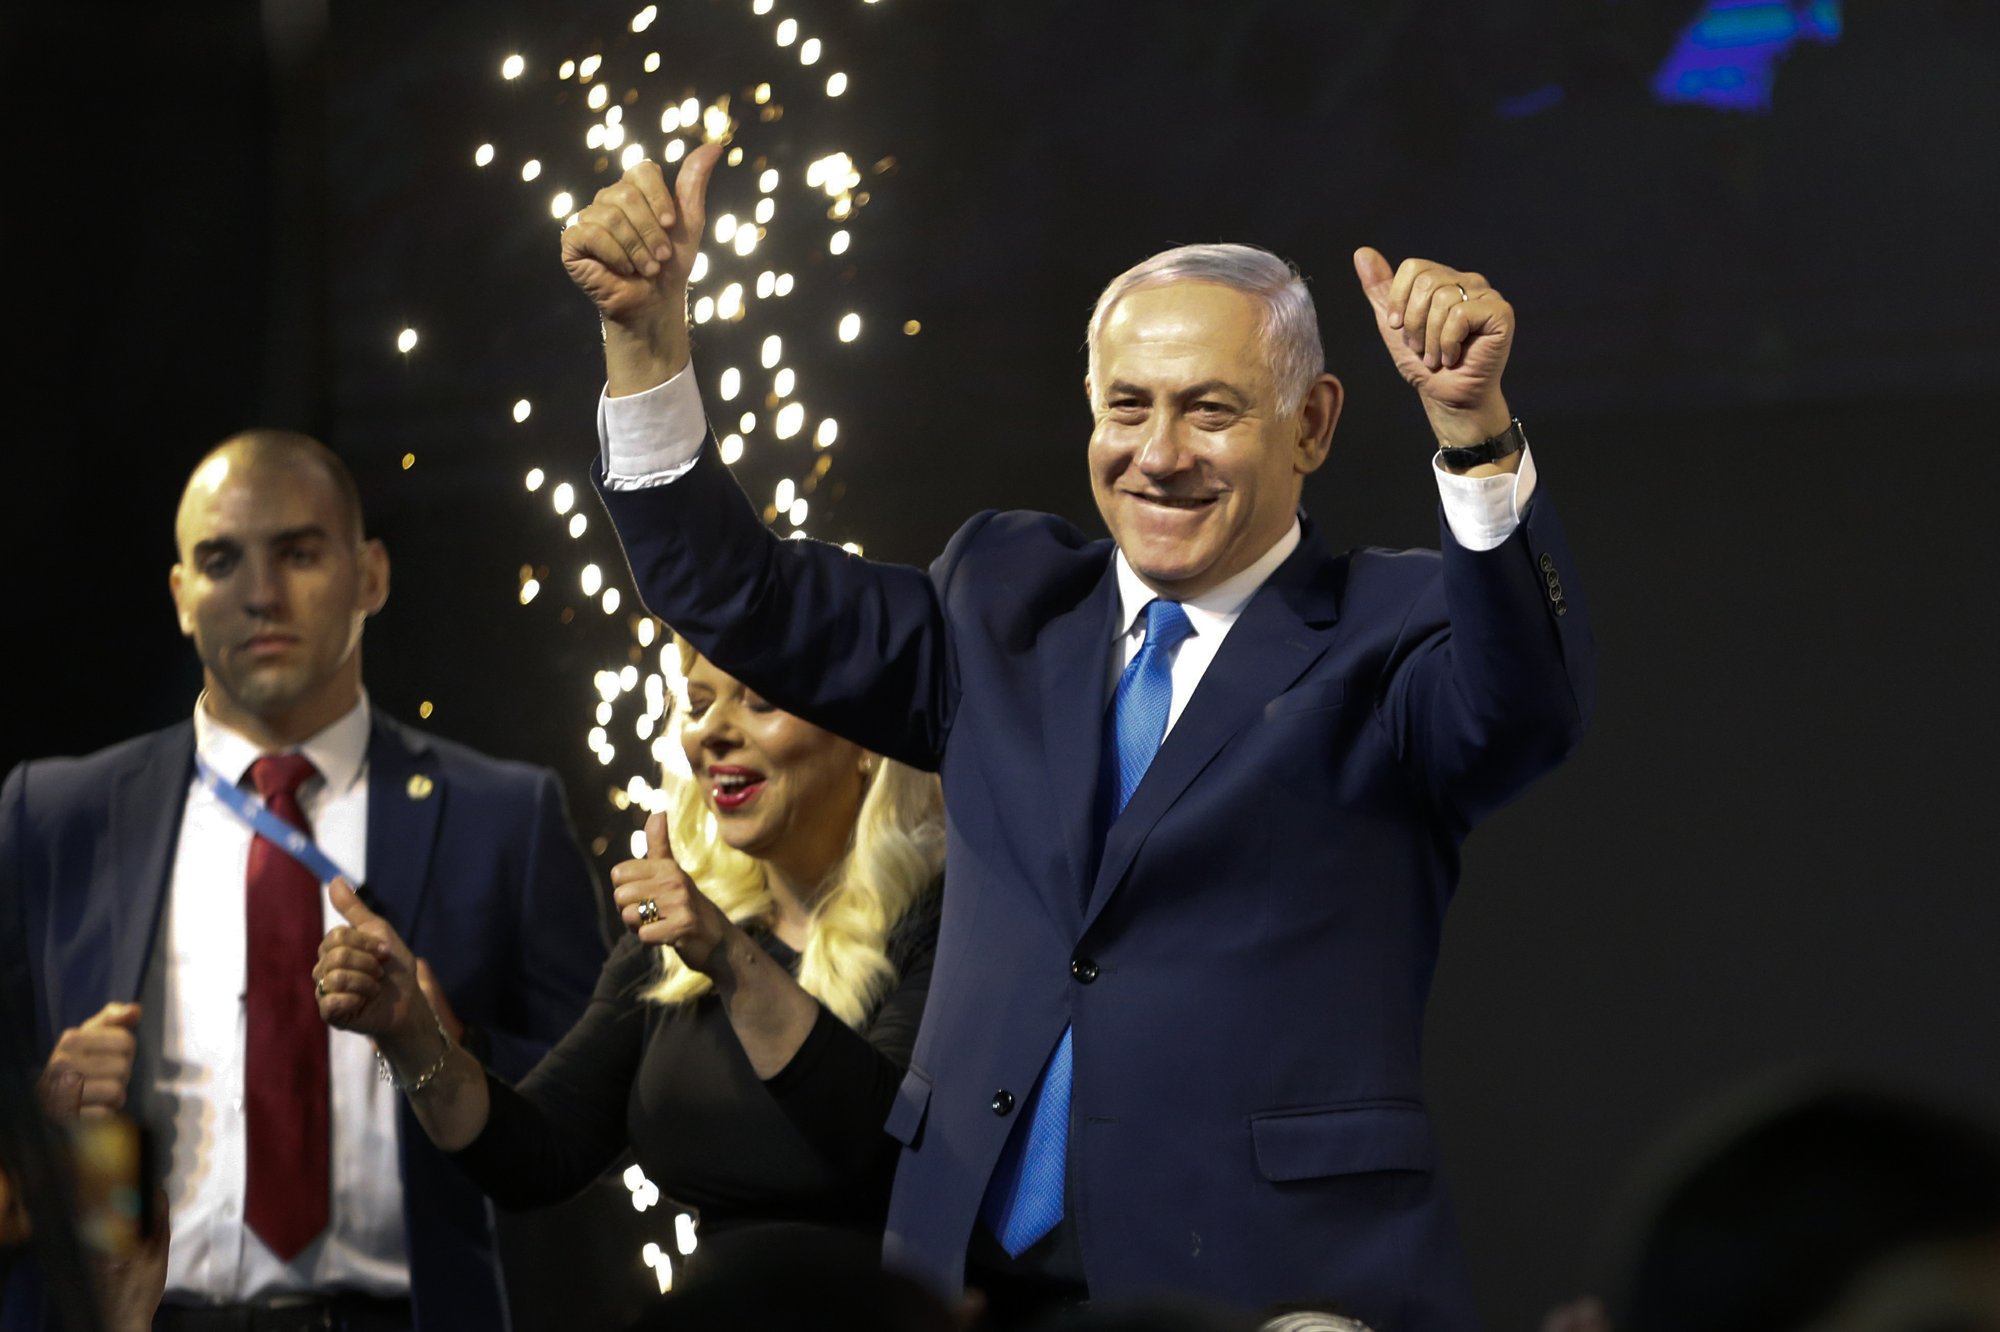 Israel's Prime Minister Benjamin Netanyahu waves to his supporters after polls for Israel's general elections closed in Tel Aviv, Israel, Wednesday, April 10, 2019. (AP Photo/Ariel Schalit)